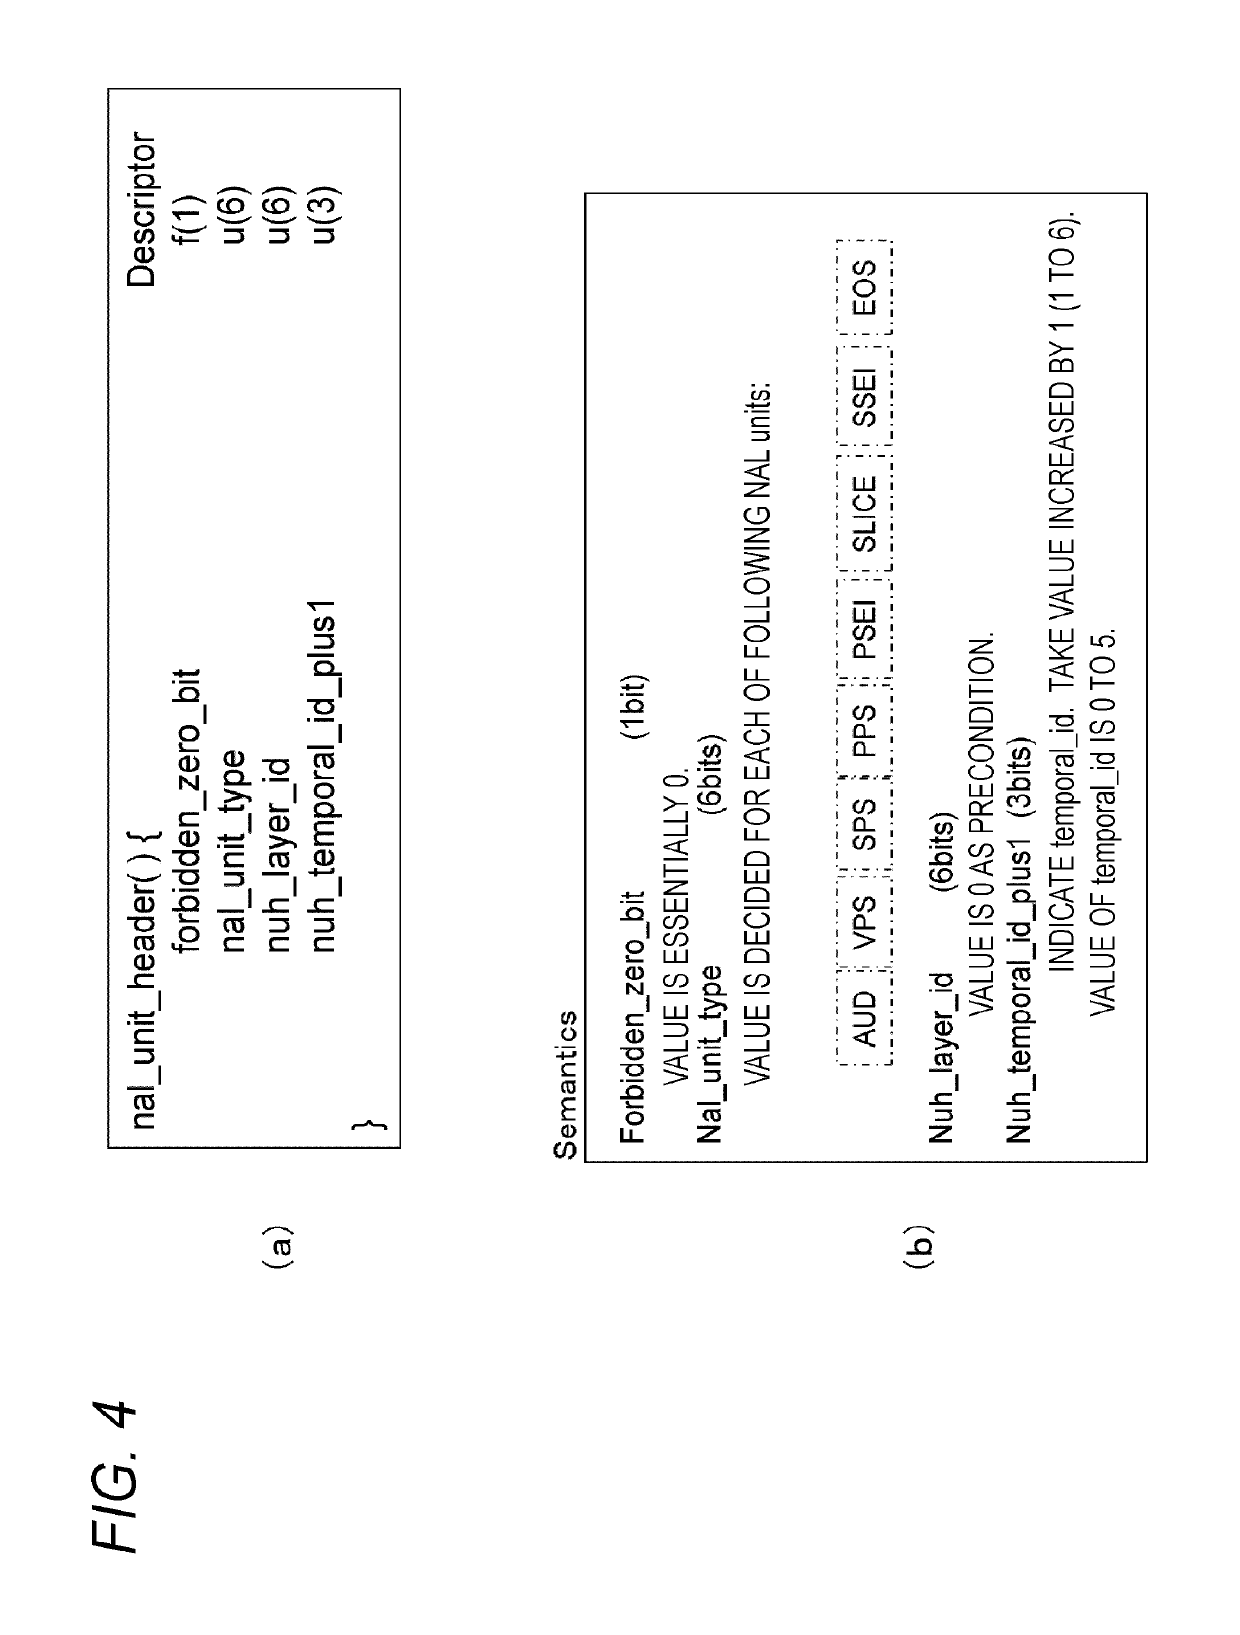 Transmission device, transmission method, reception device, and reception method for a first stream having encoded image data of pictures on a low-level side and a second stream having encoded image data of pictures on a high-level side